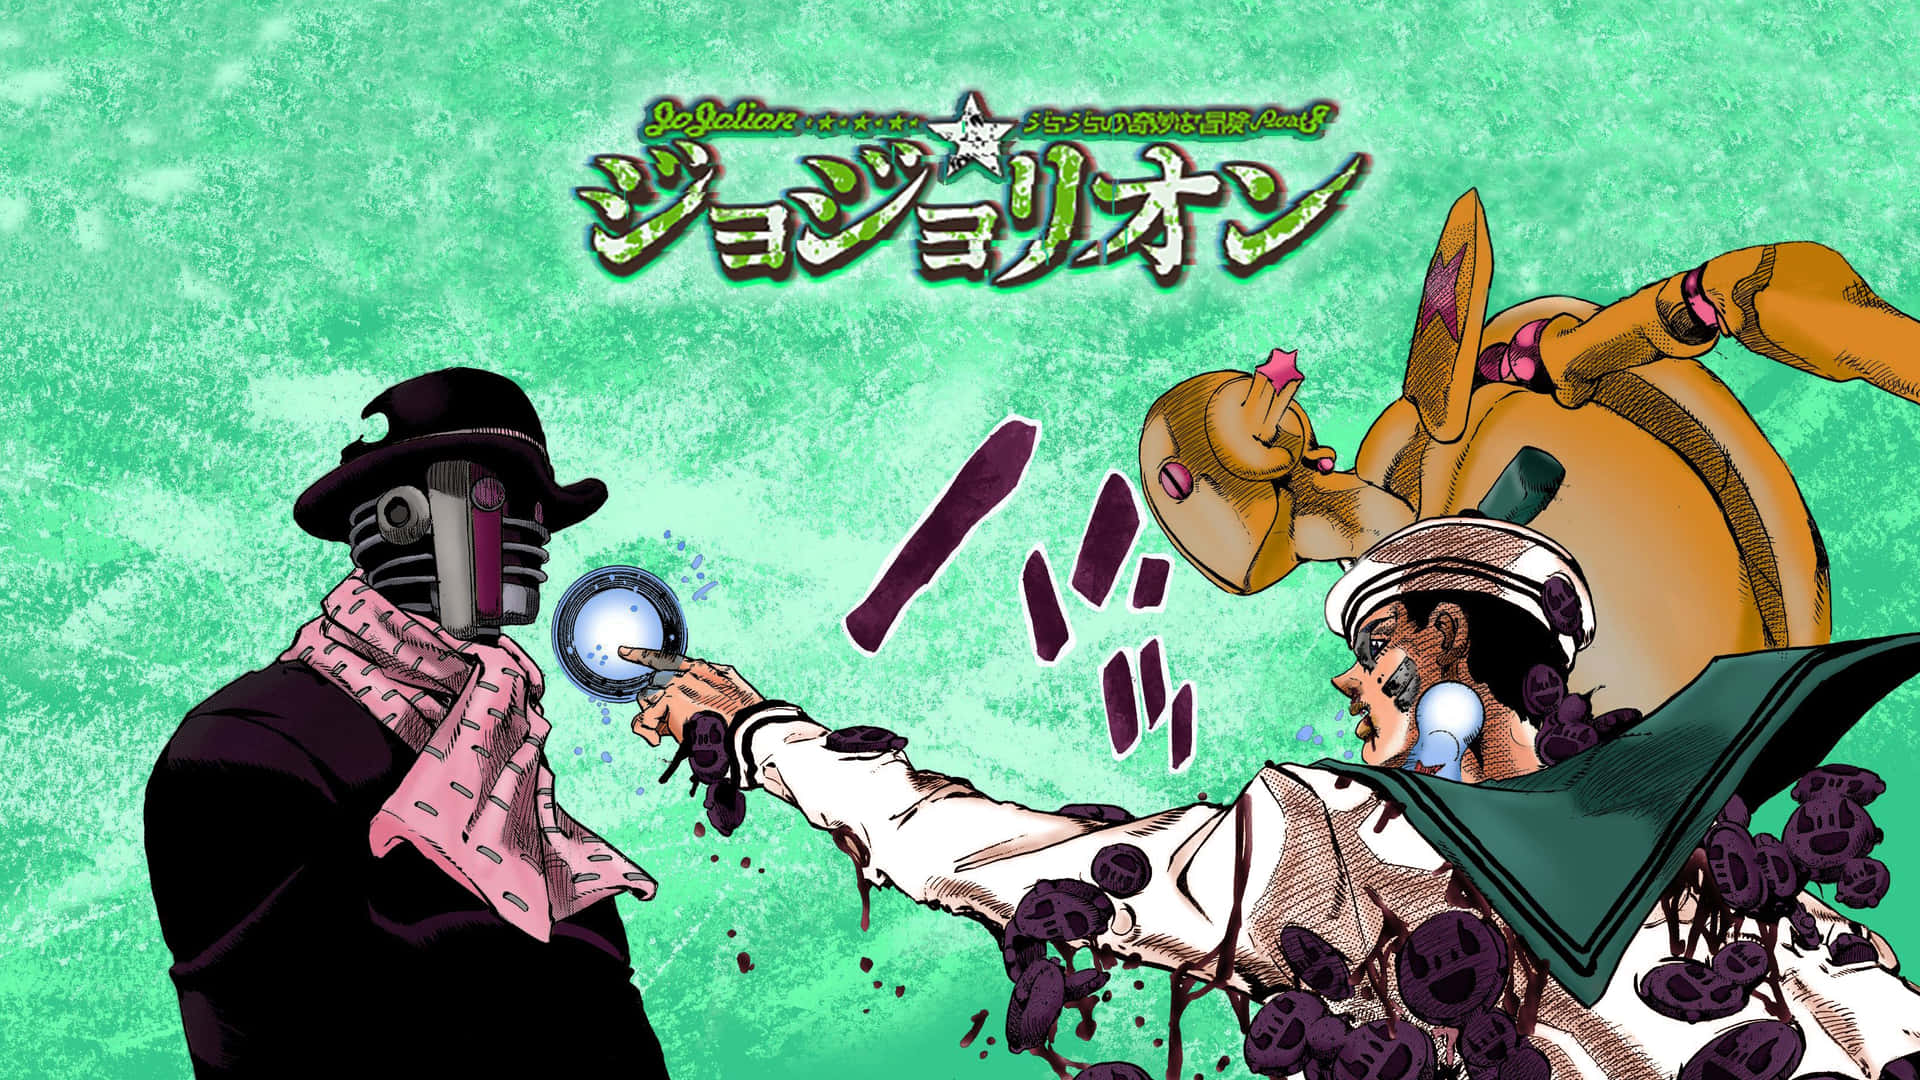 JoJolion characters in a colorful and dynamic art style Wallpaper